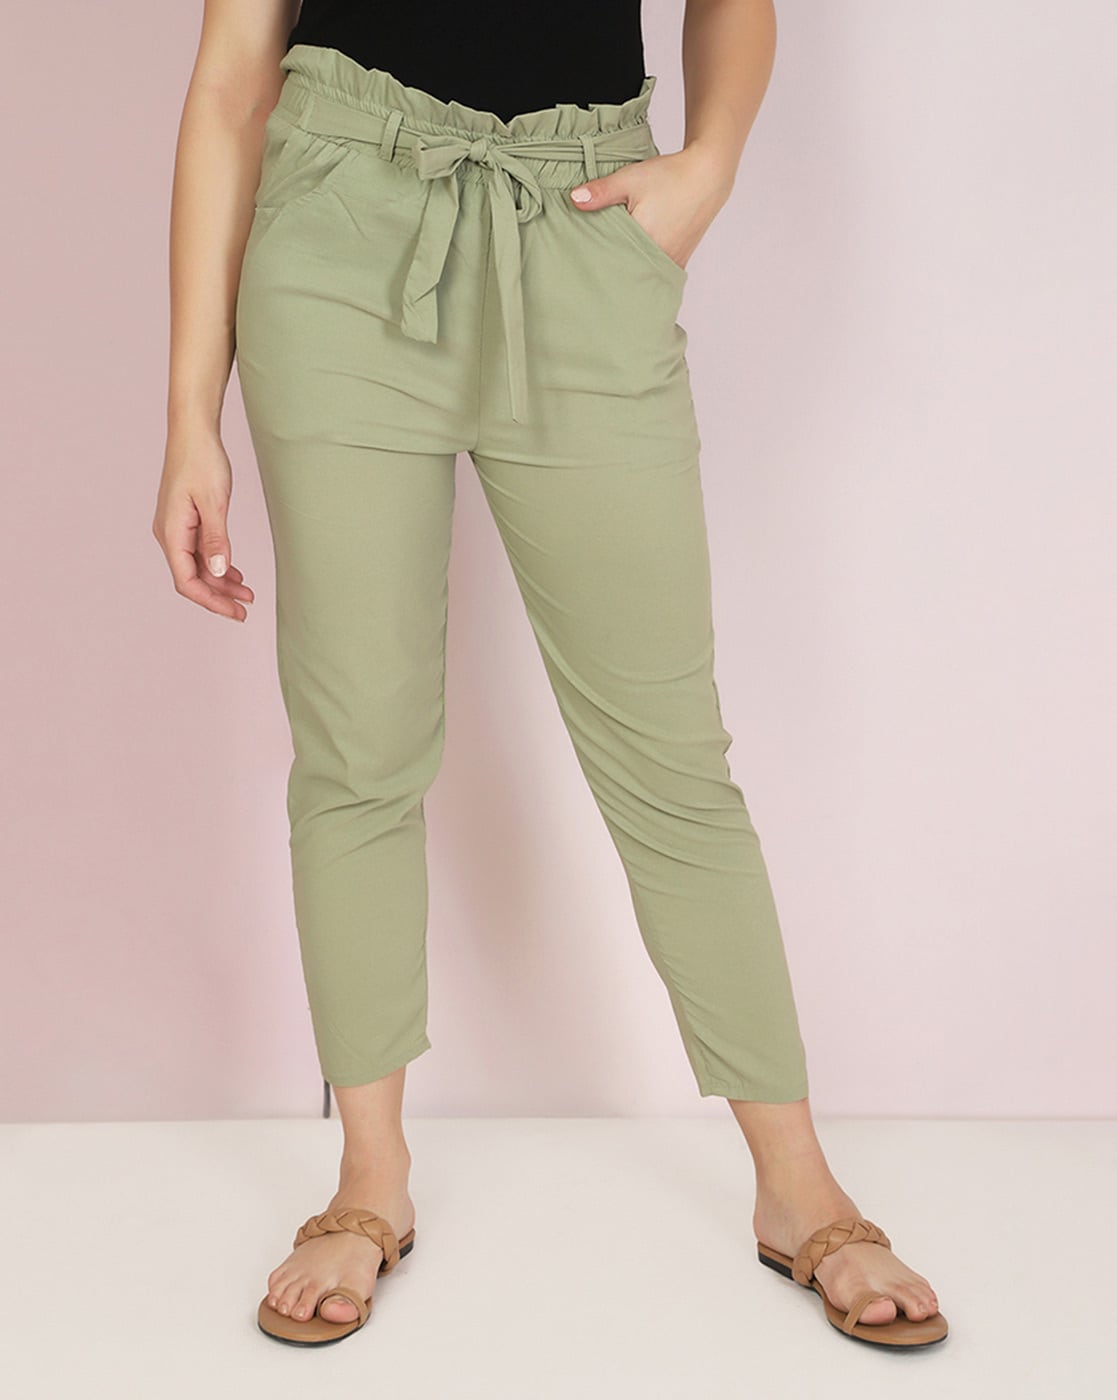 Pin by Verónica P on Moda | Olive green pants outfit, Work outfits women,  Stylish work outfits